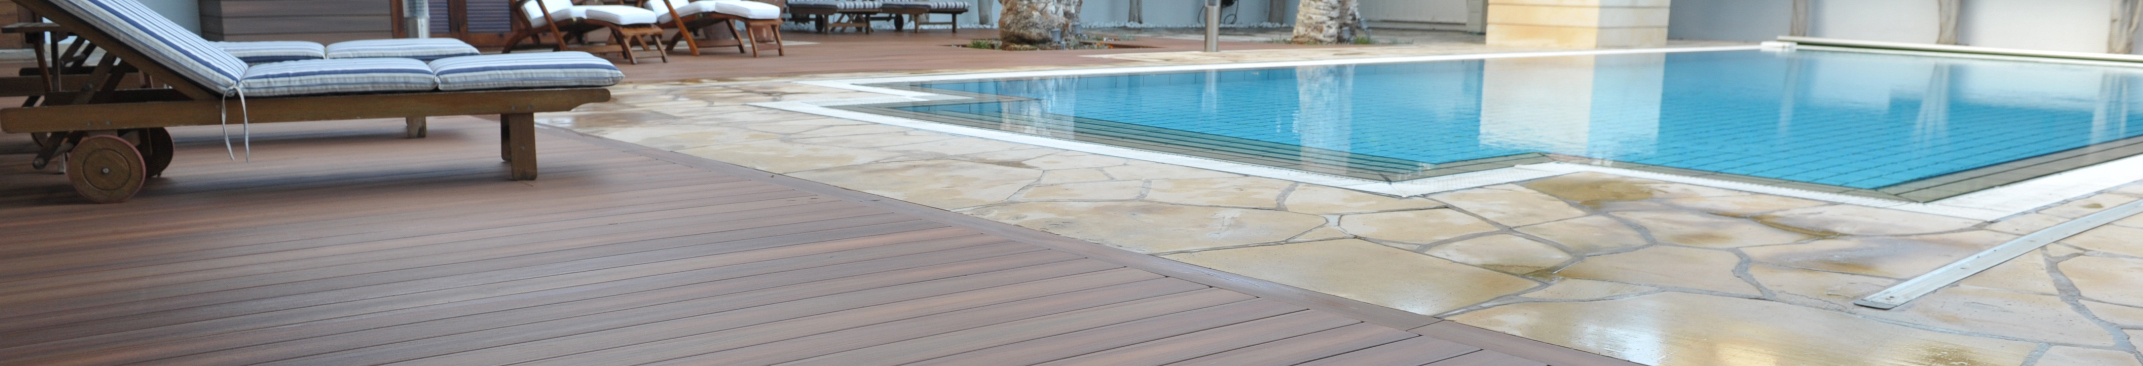 Get A Modern And Beautiful Deck With Grey Composite Decking